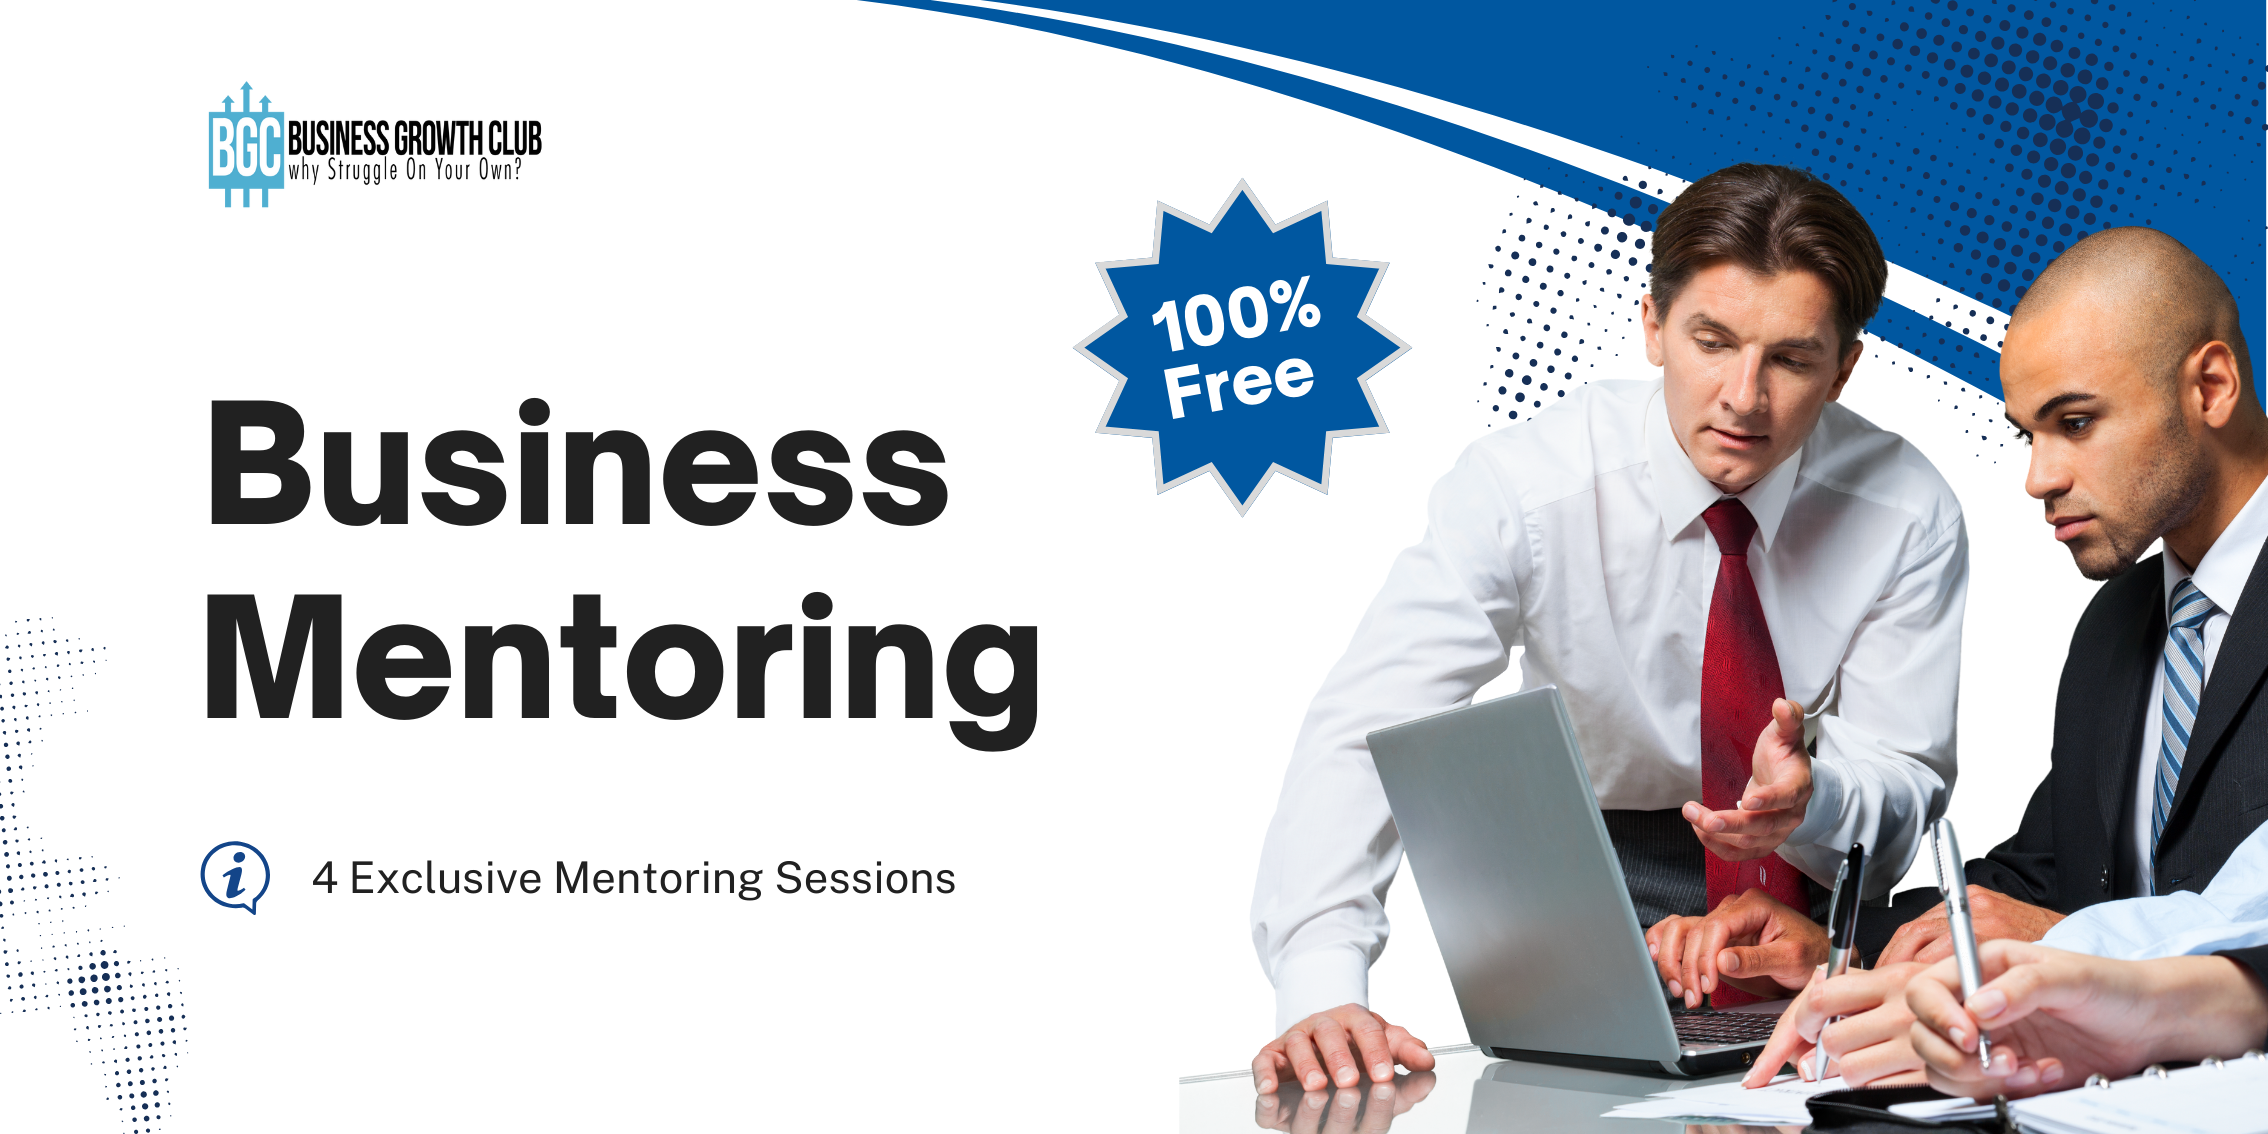 start your own business free mentoring 